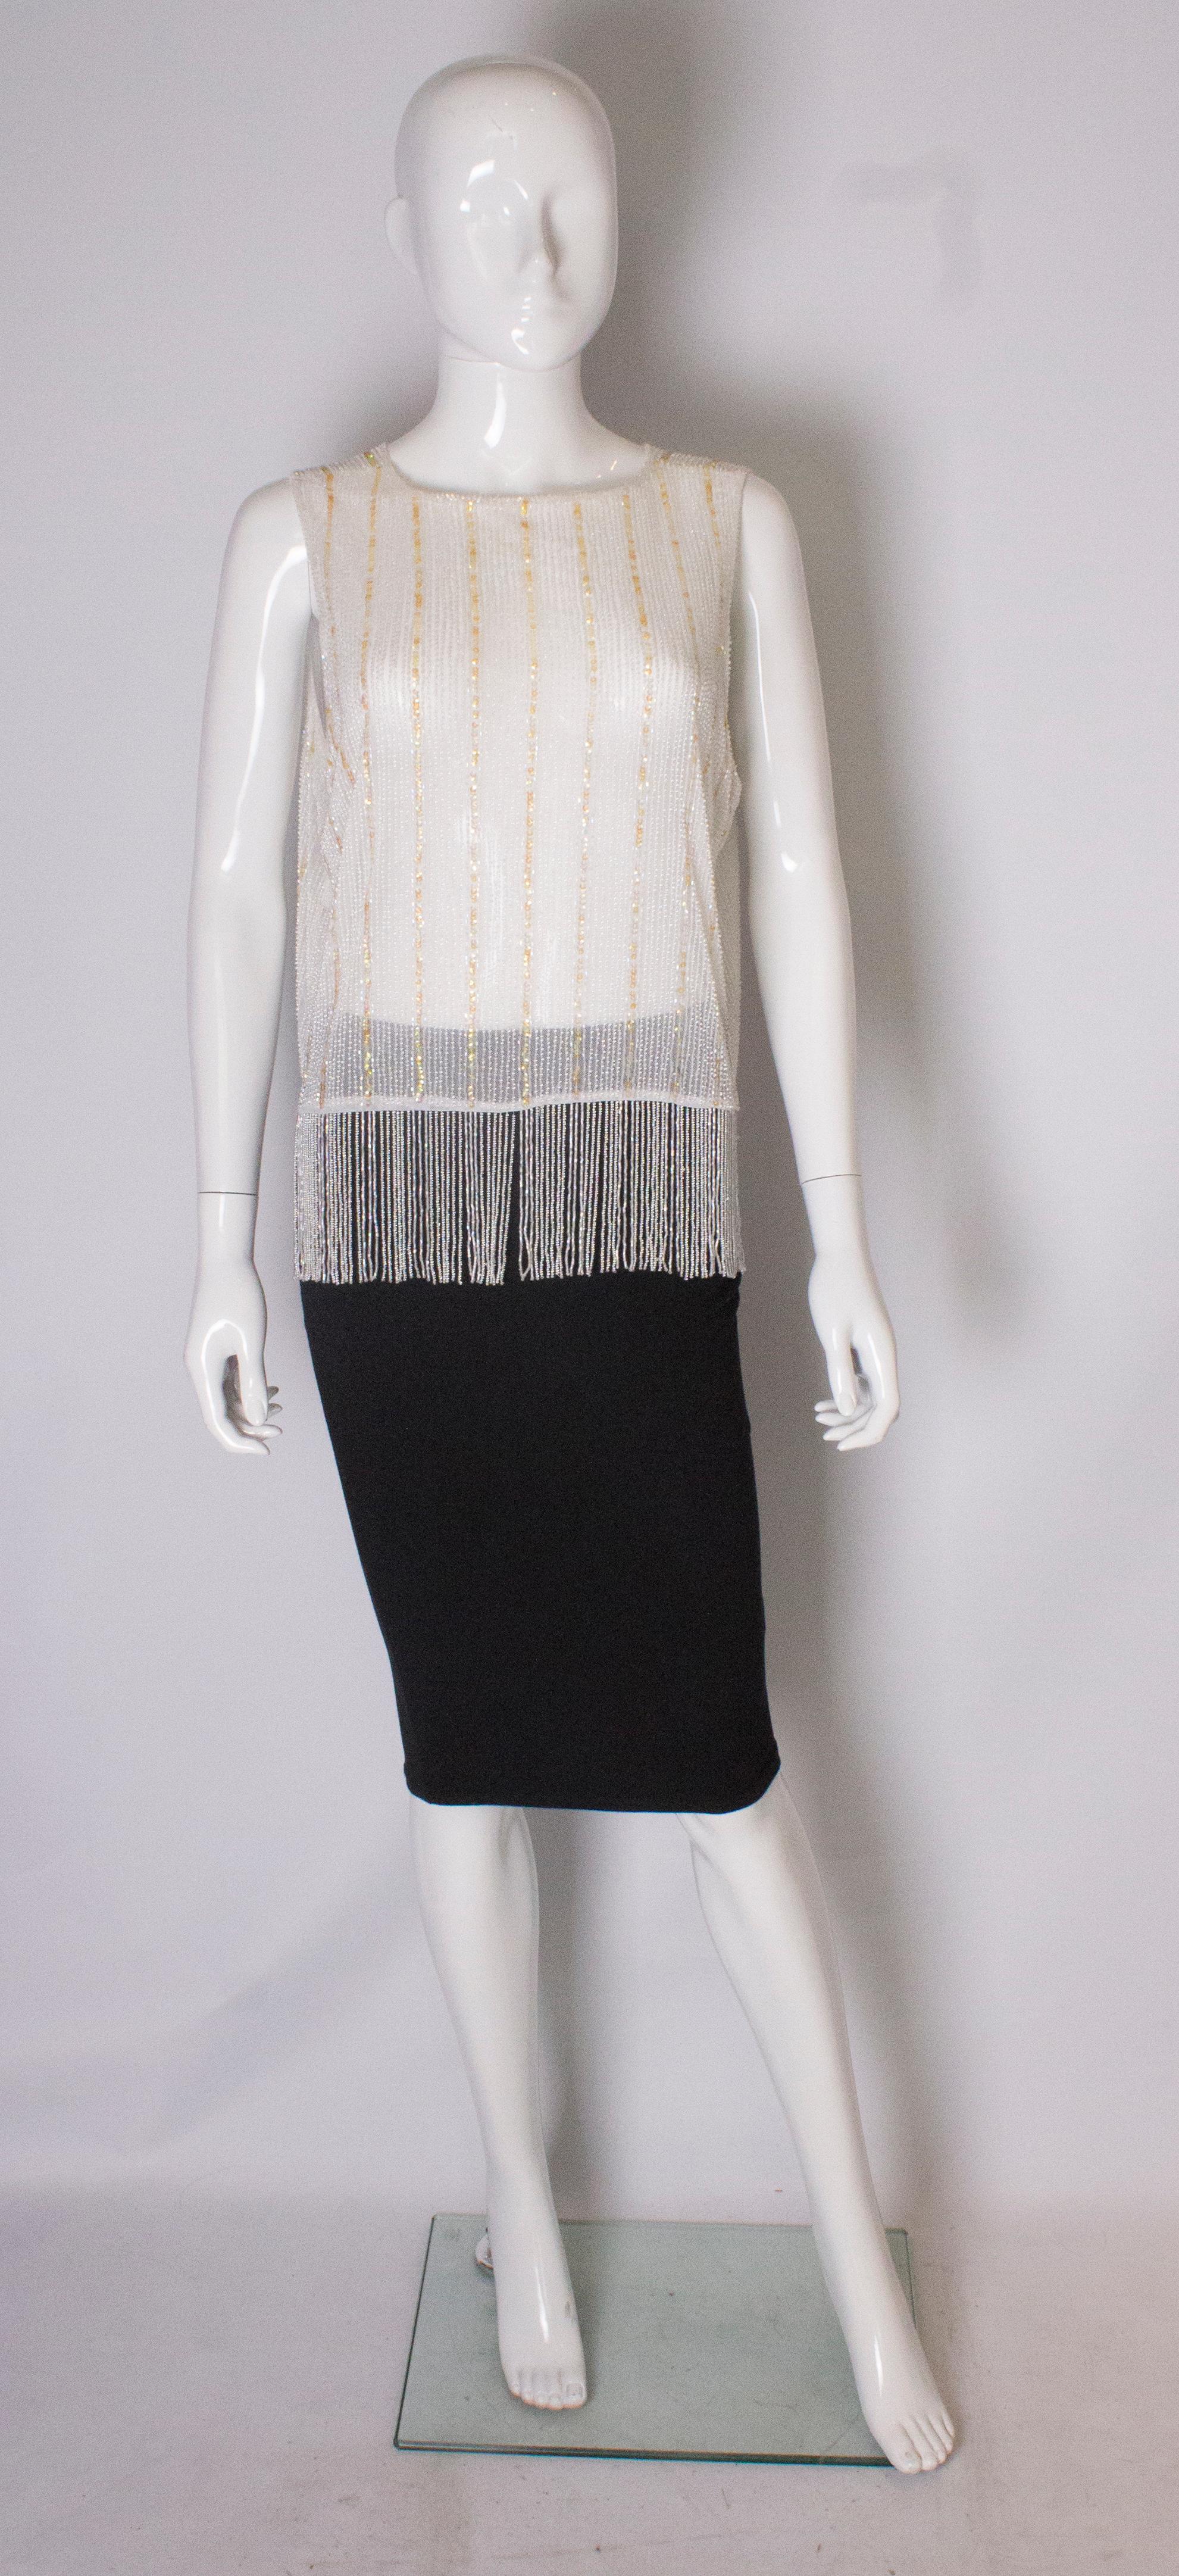 A chic and easy to wear top , made up of white beads with vertical lines in gold sequins.
The top measures , bust up to 37'', length 19'' with out fringing ,and the fringing adds an additional 5 ''.